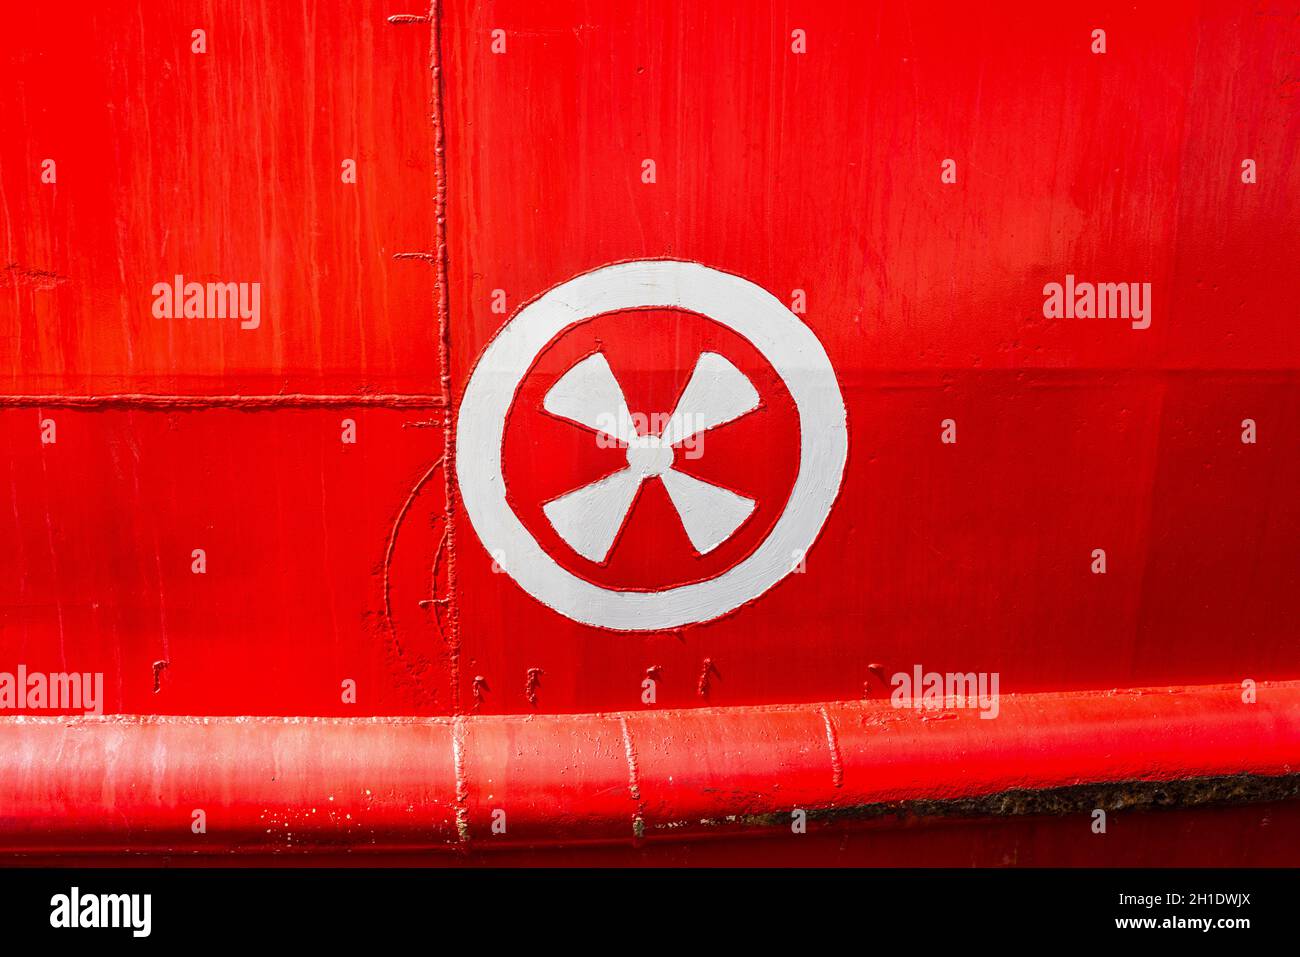 Steel Hull of red vessel in water with detail of a ship's hull markings of thruster screw position Stock Photo